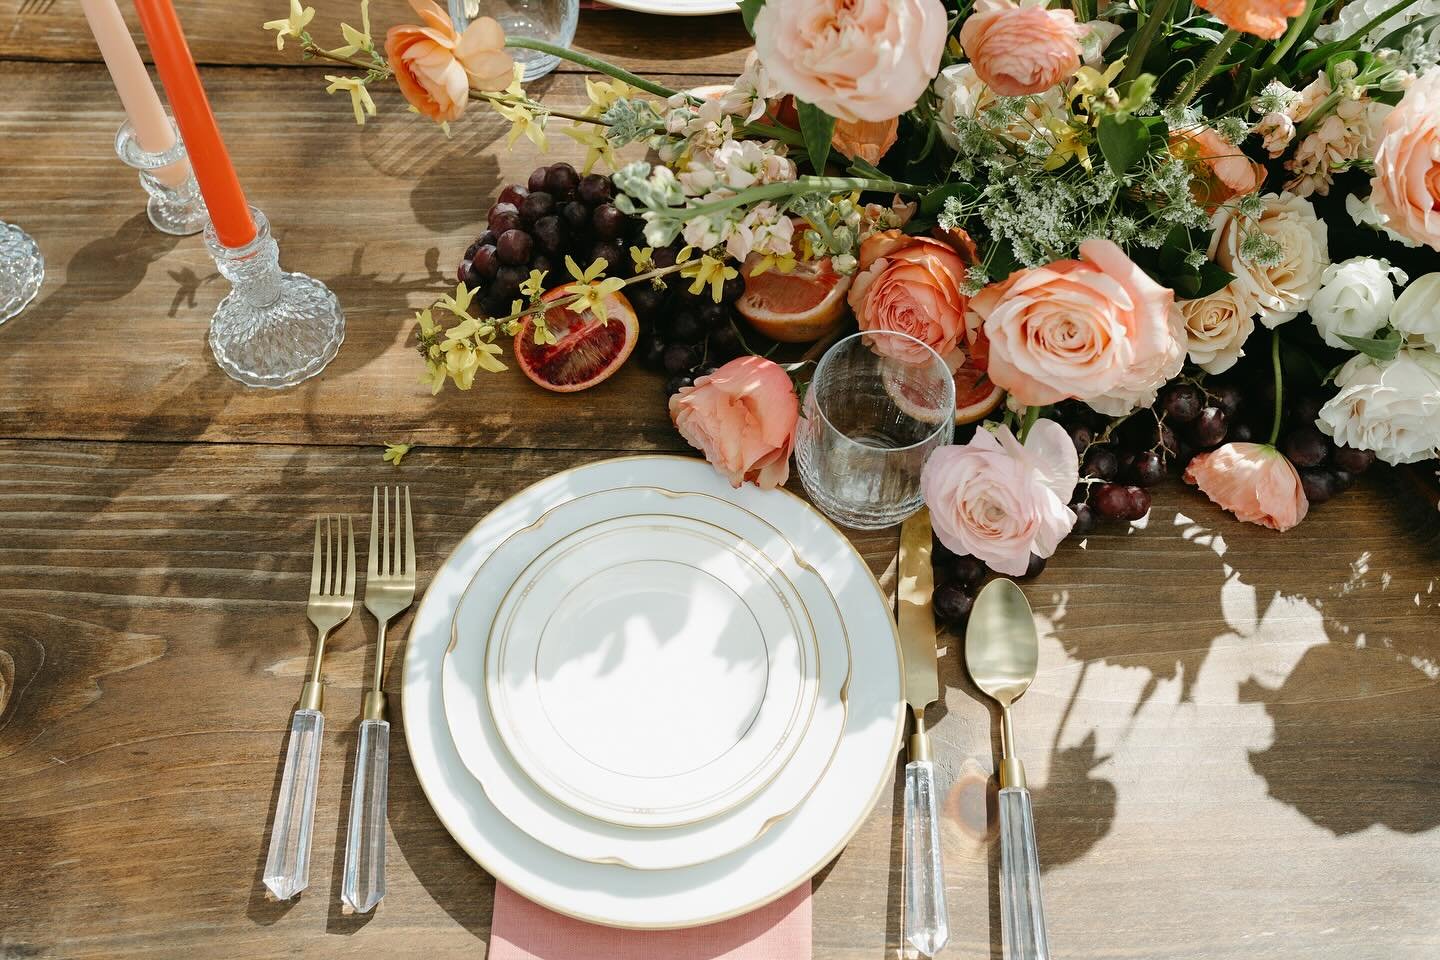 this spring garden tablescape &gt;&gt;&gt;&gt;&gt;&gt;

This tablescape had ALL the dreamy details. 🍊🍇🍑

hosts: @libertyhomesteadmobilebar x @bespokepizzaidaho 
florals &amp; design: @bloomroomfloralco 
venue: @deerflatranch 
large rentals: @rusti